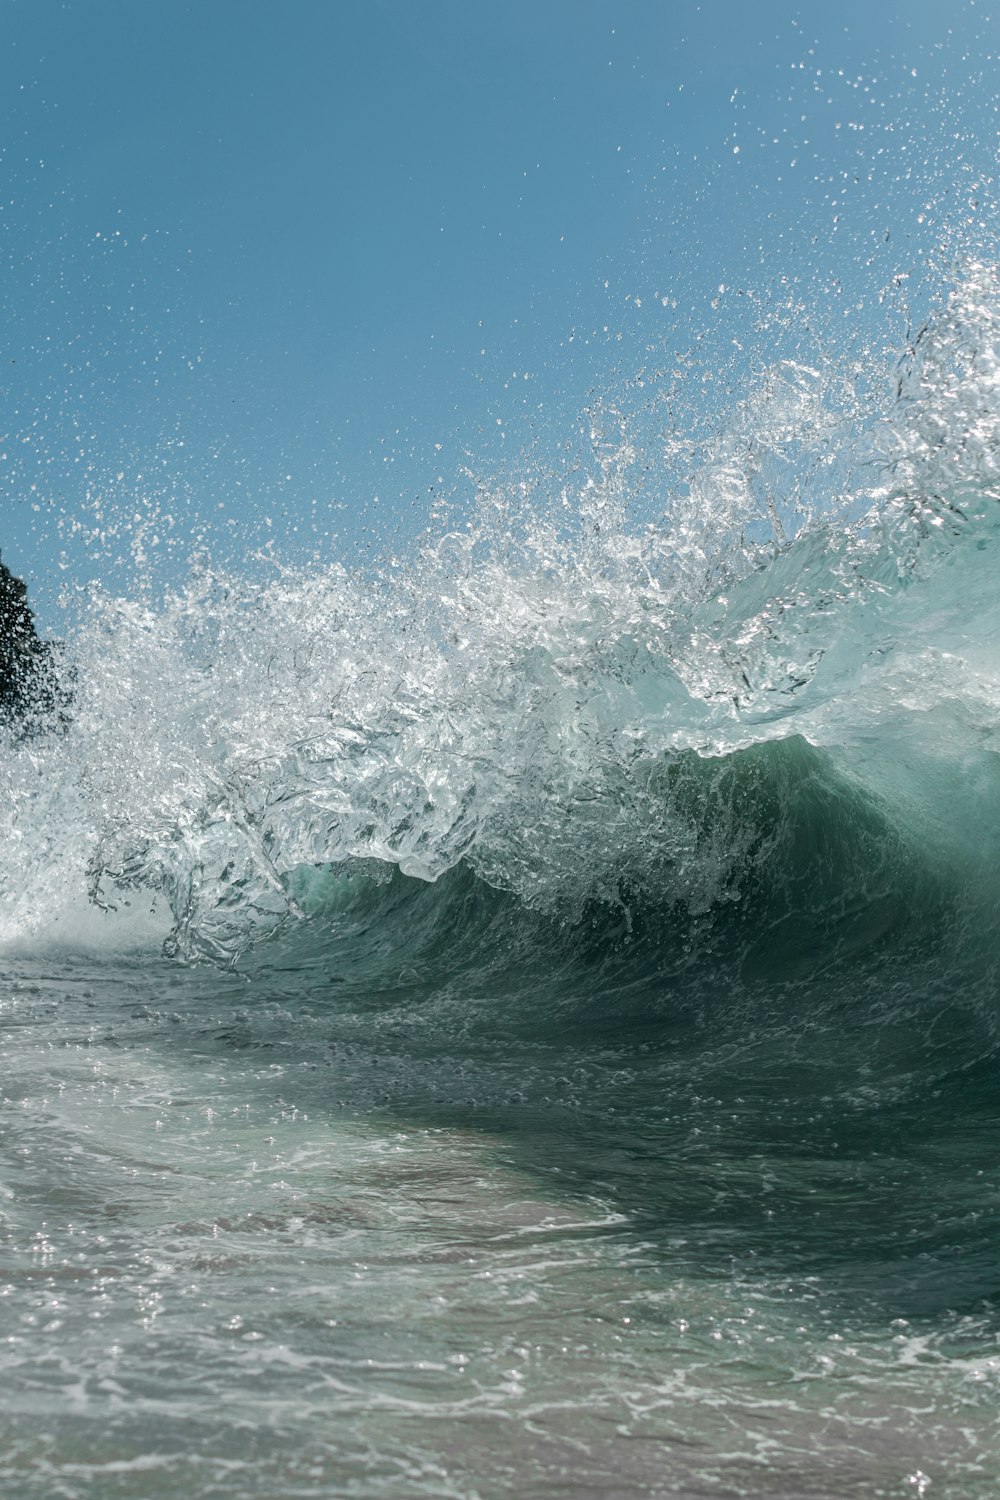 time-lapse photography of a splashing sea wave